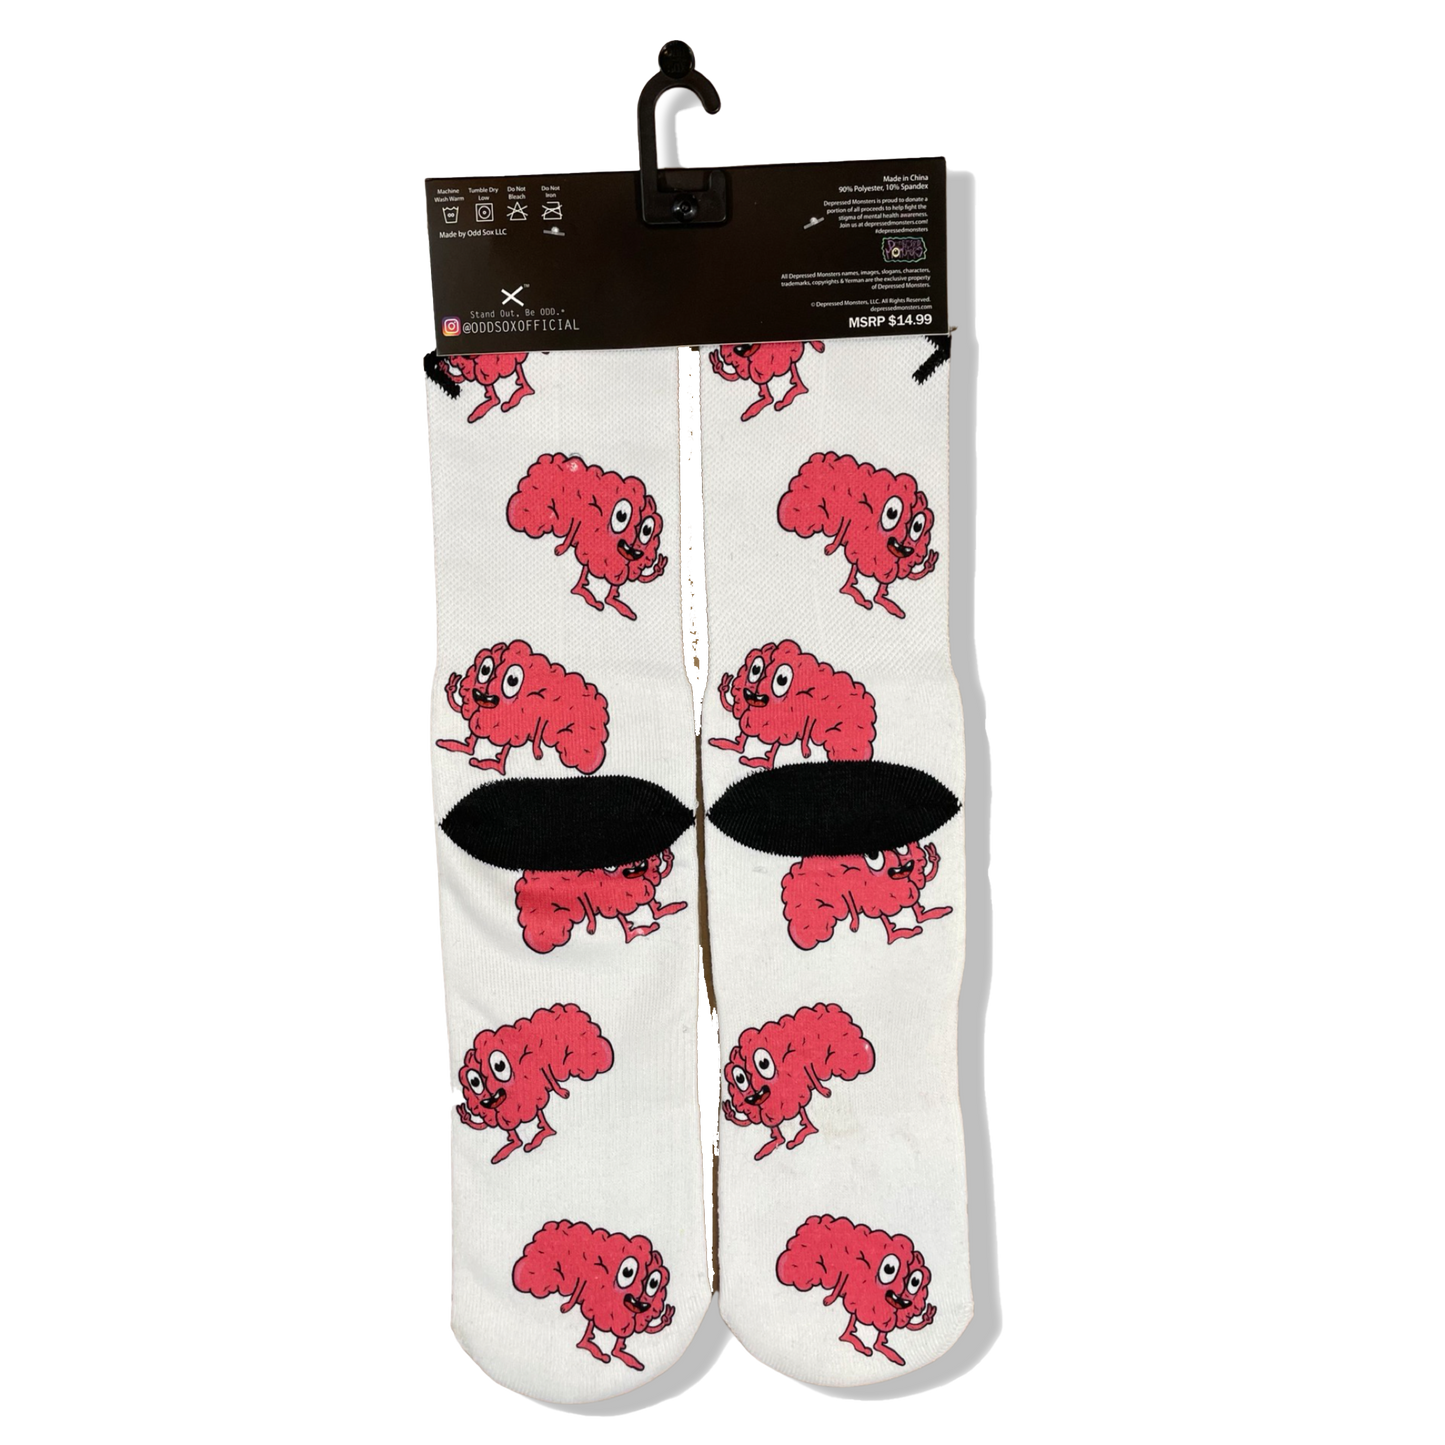 Brains are Buttheads Odd Sox Collab